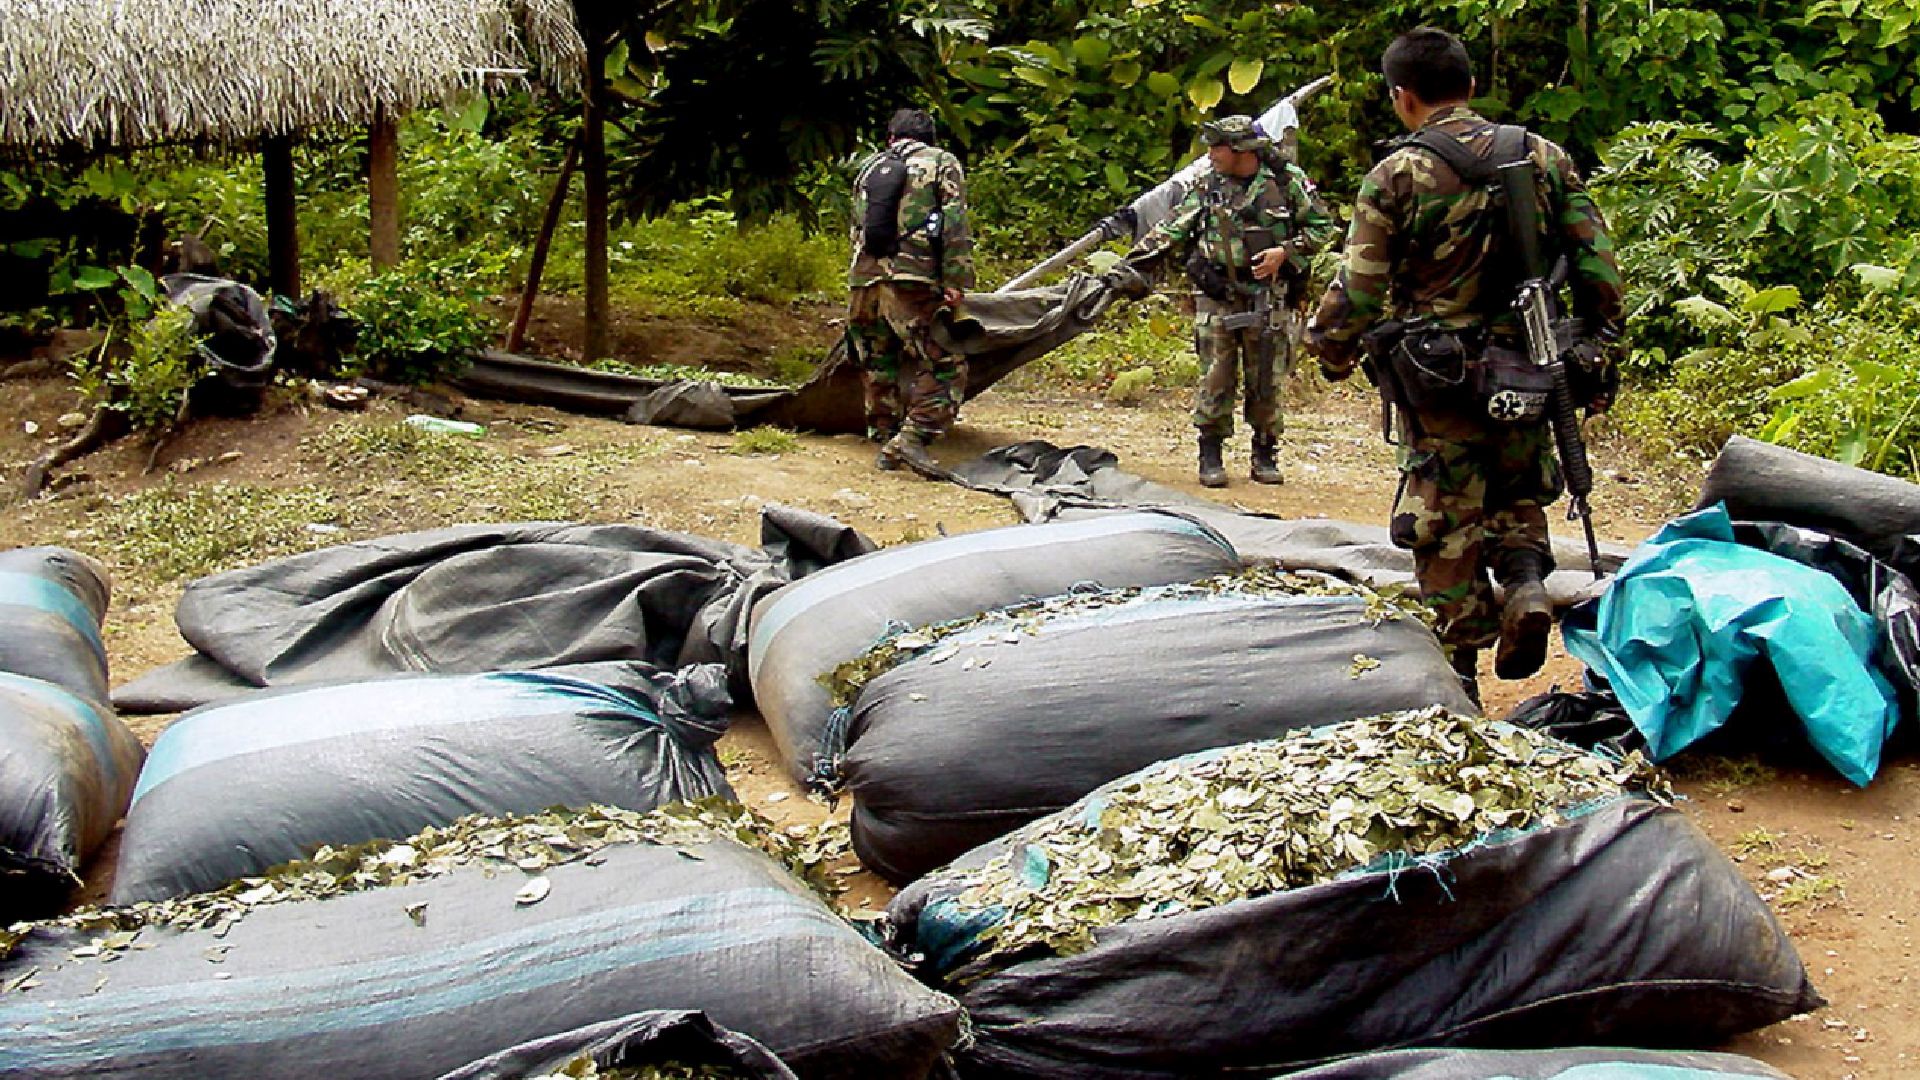 The passing Peruvian governments continue to fight against the total eradication of coca leaf cultivation.  (Andean)